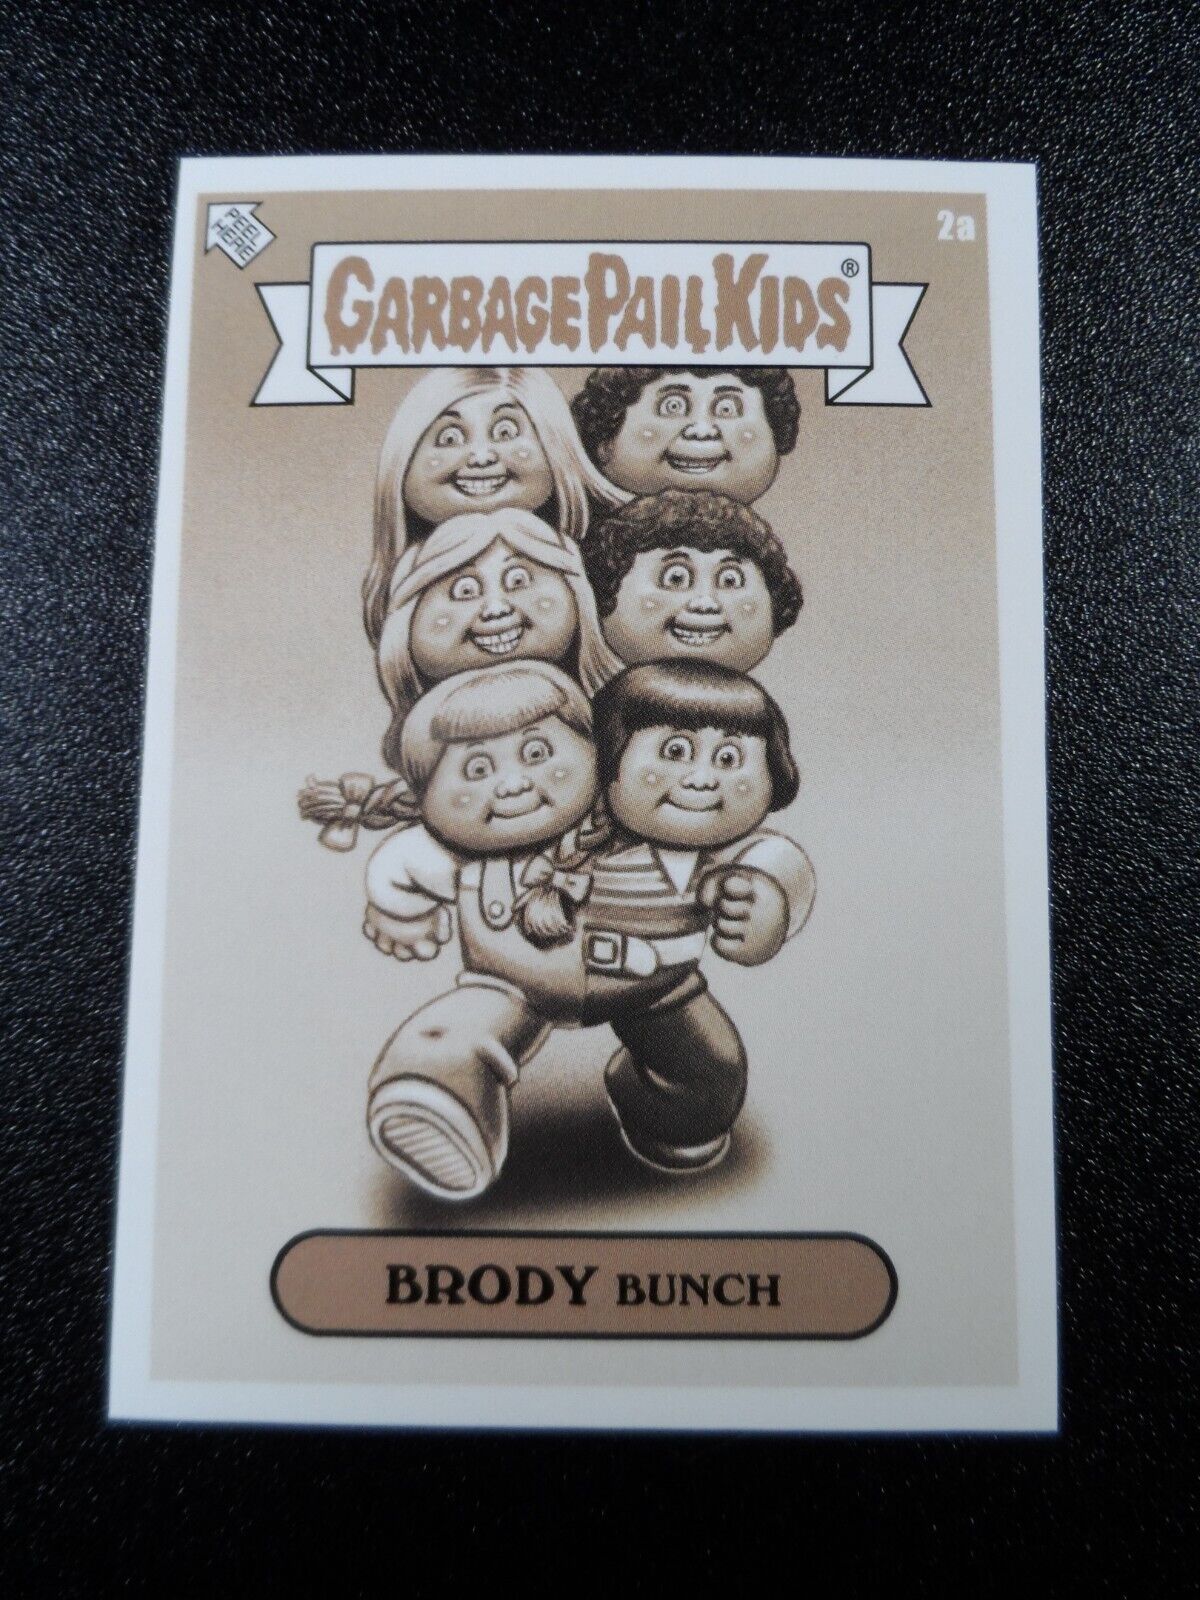 SP Sepia Parallel Brady Bunch Spoof Brody Bunch 2a Garbage Pail Kids